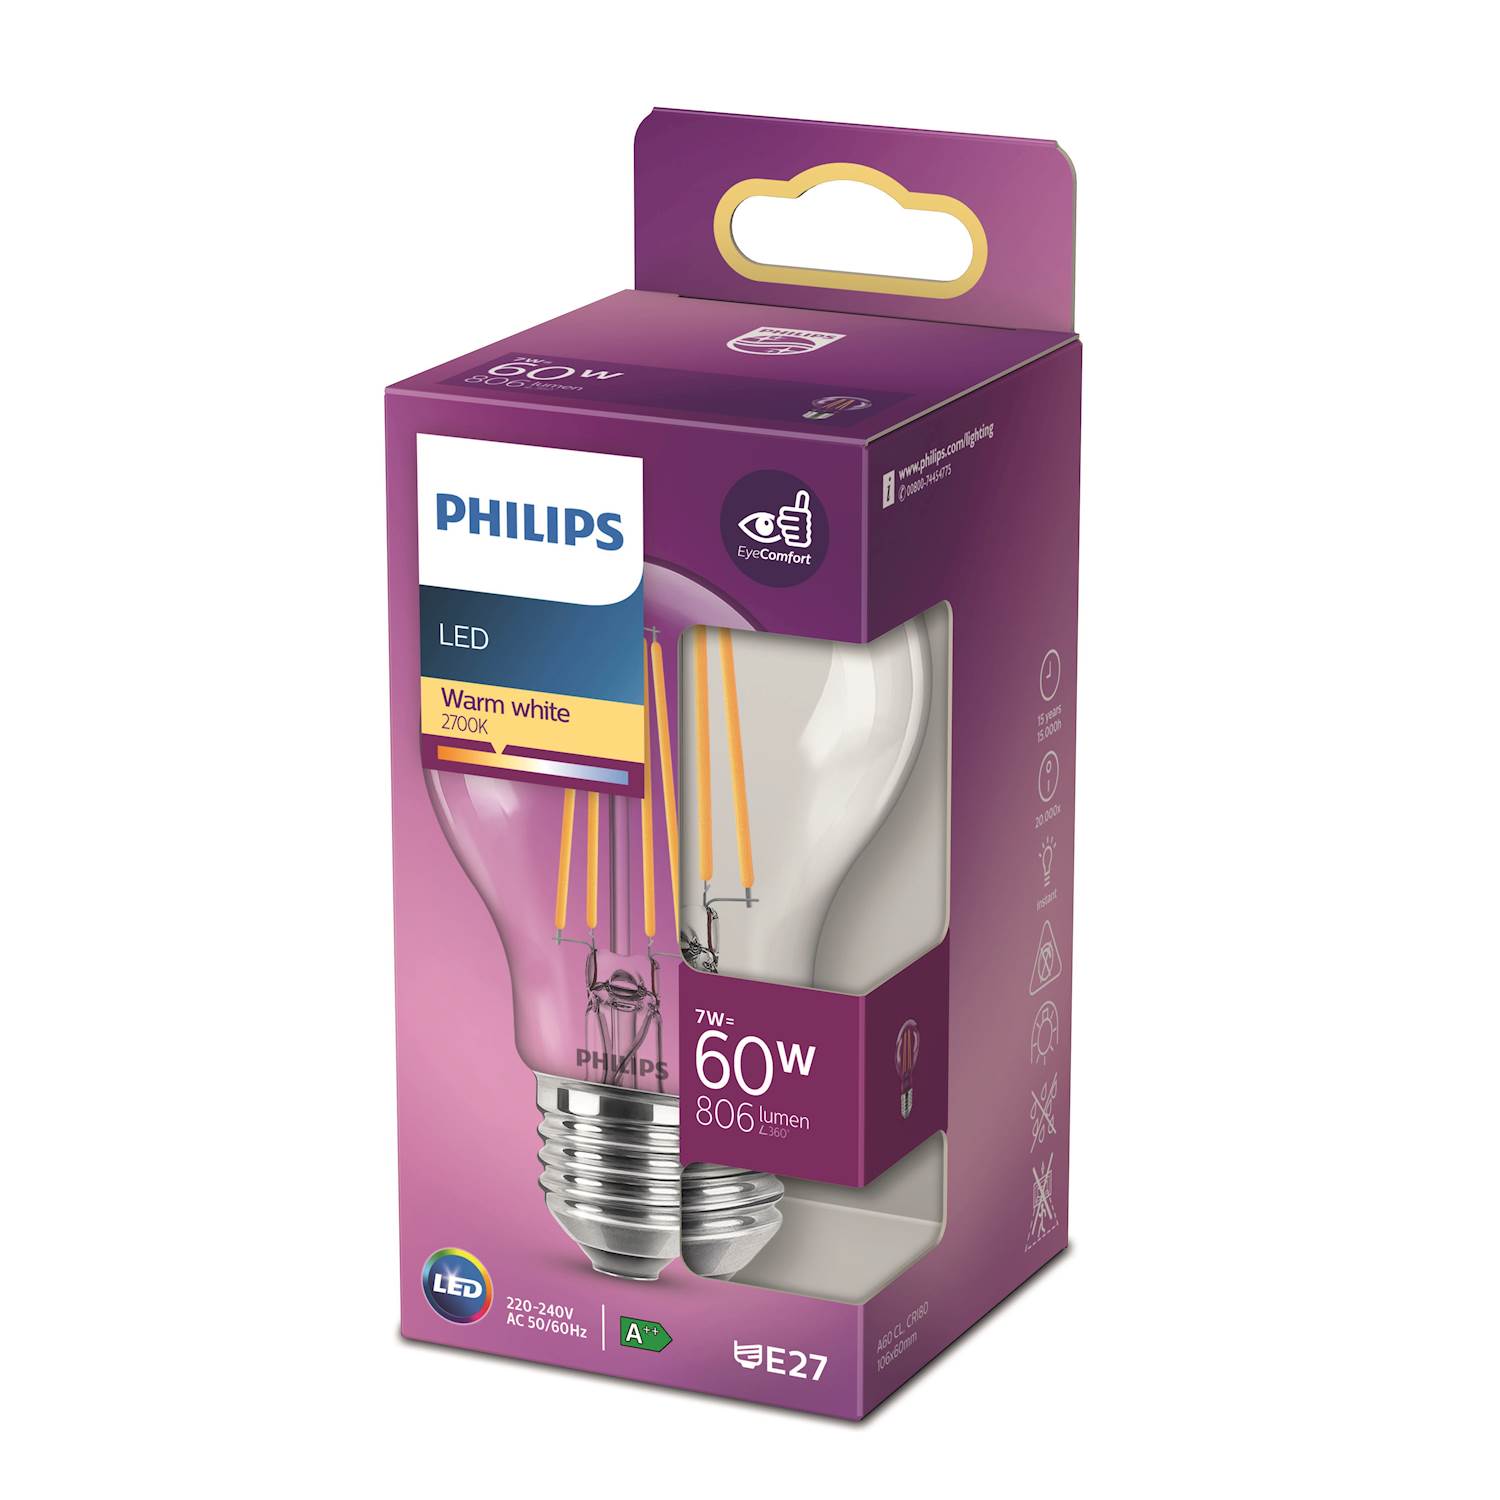 Philips LED Classic 60w norm e27 nd